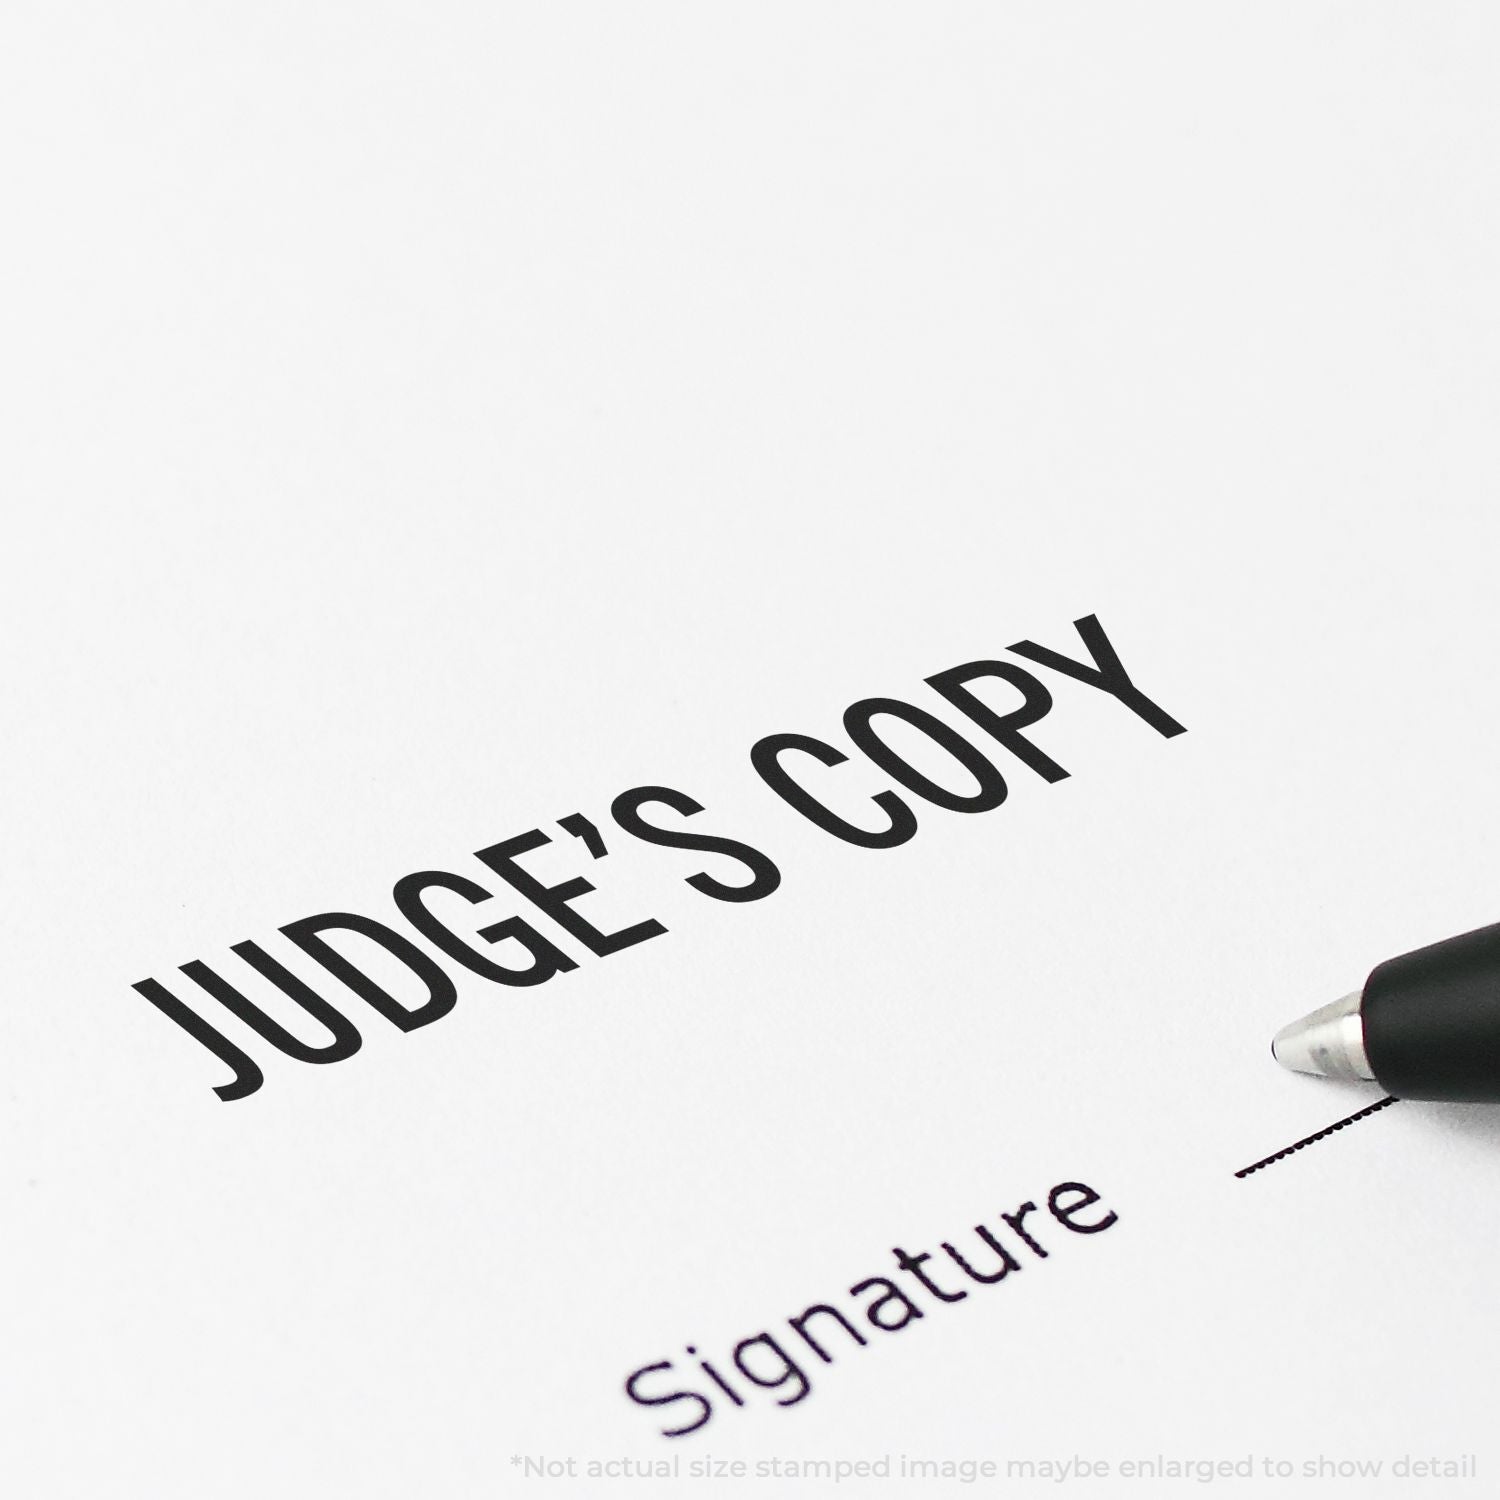 A self-inking stamp with a stamped image showing how the text "JUDGE'S COPY" is displayed after stamping.